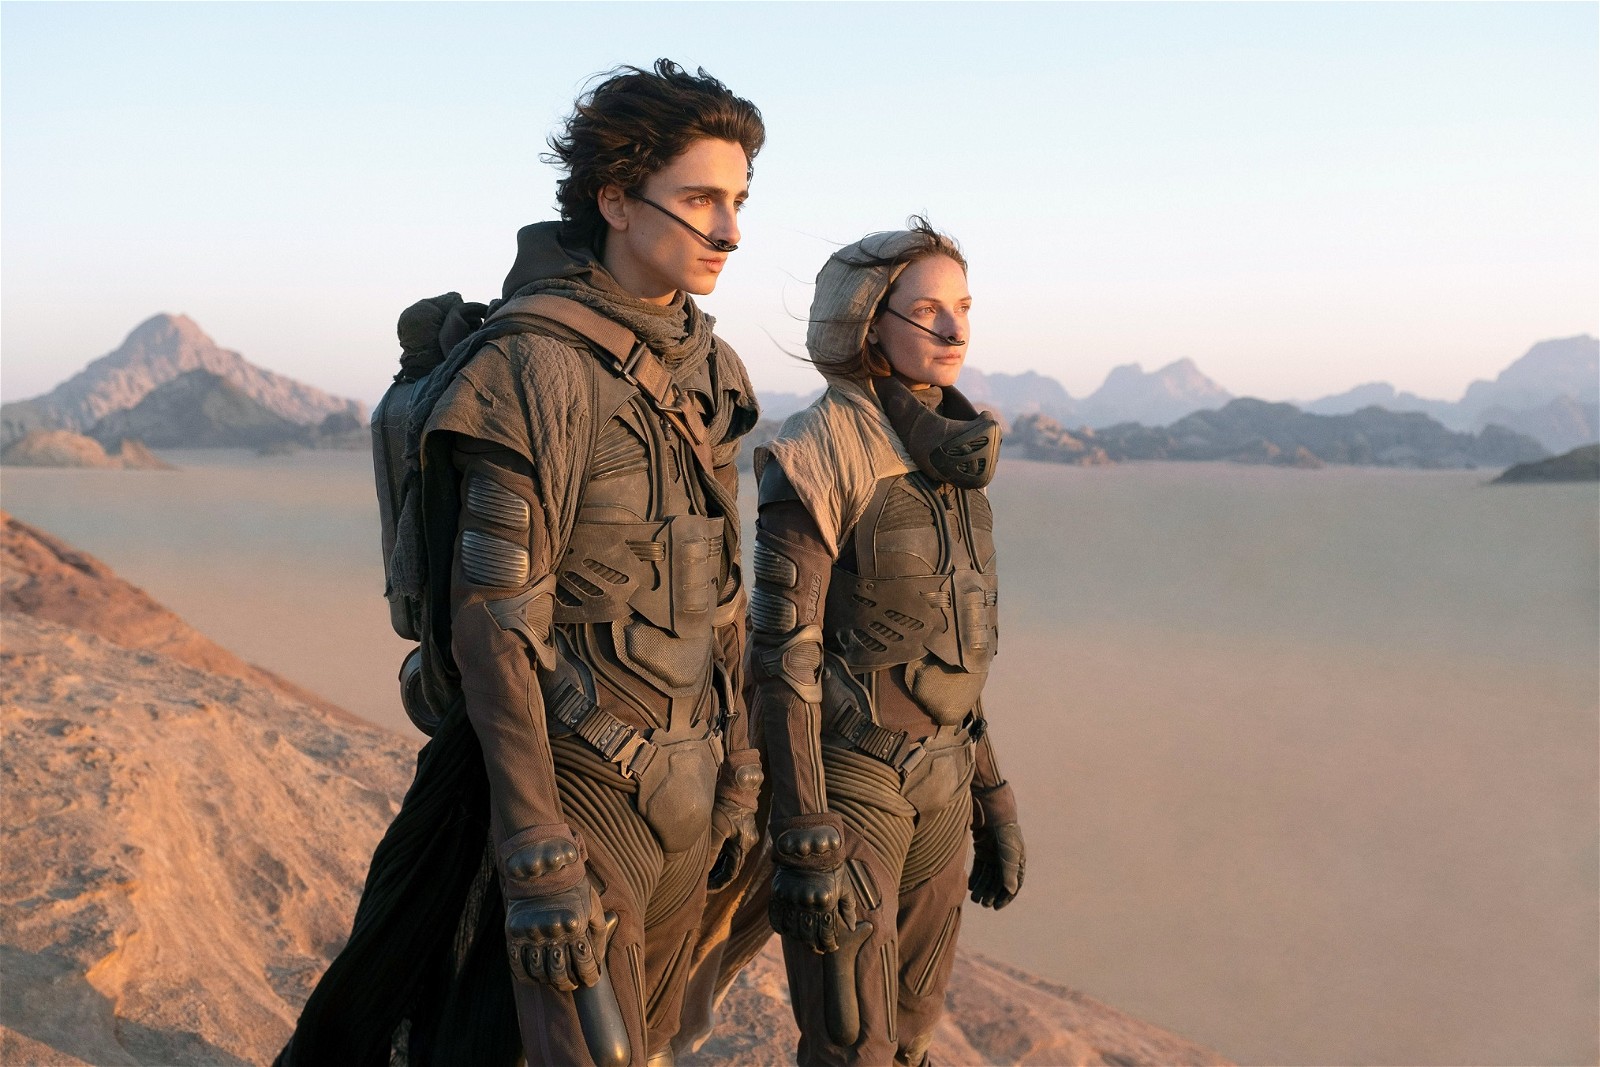 Rebecca Ferguson and Timothee Chalamet in a still from Dune